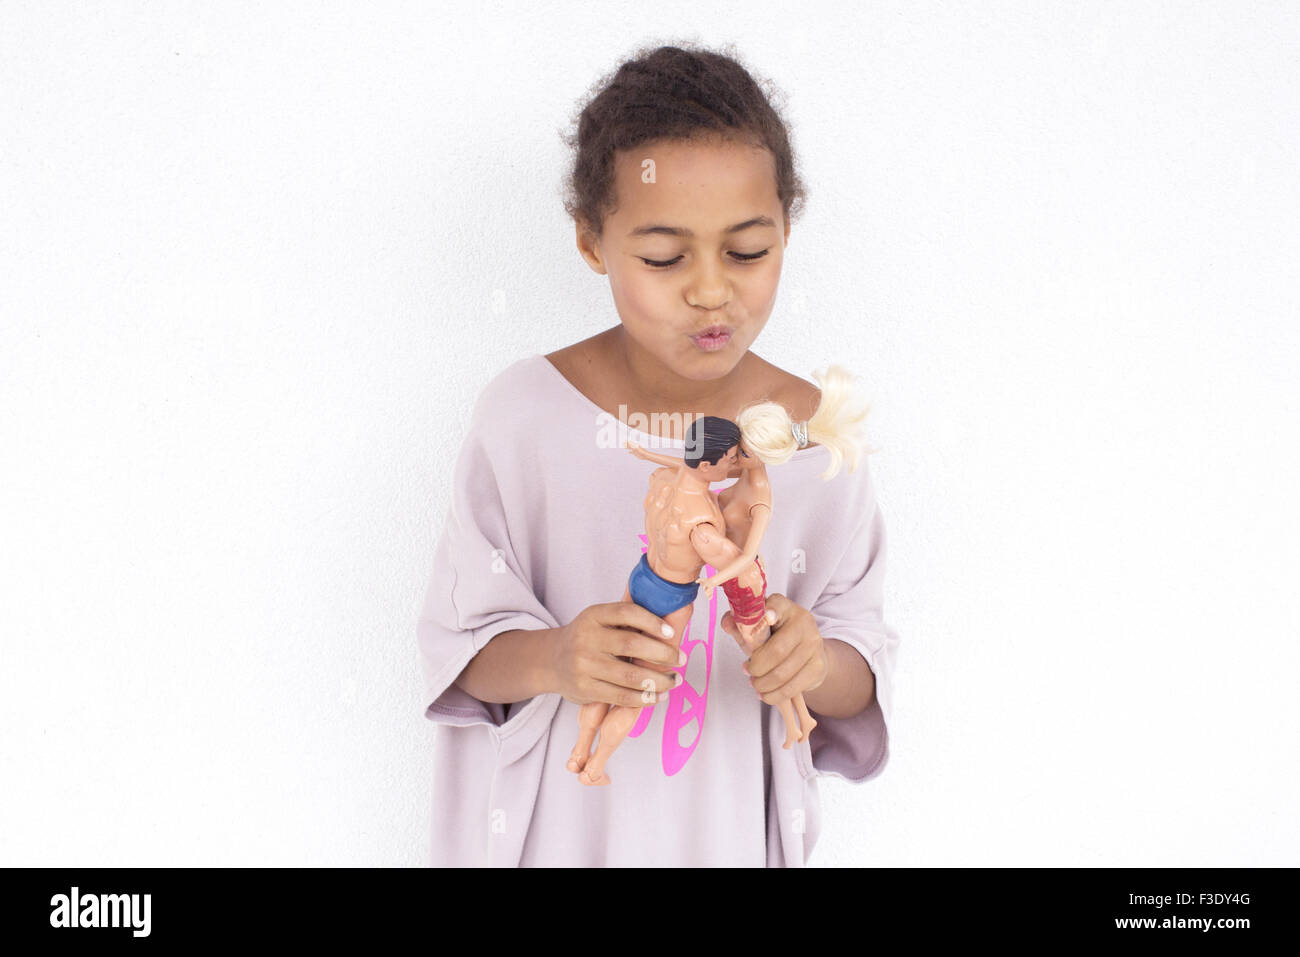 Girl making dolls kiss each other Stock Photo